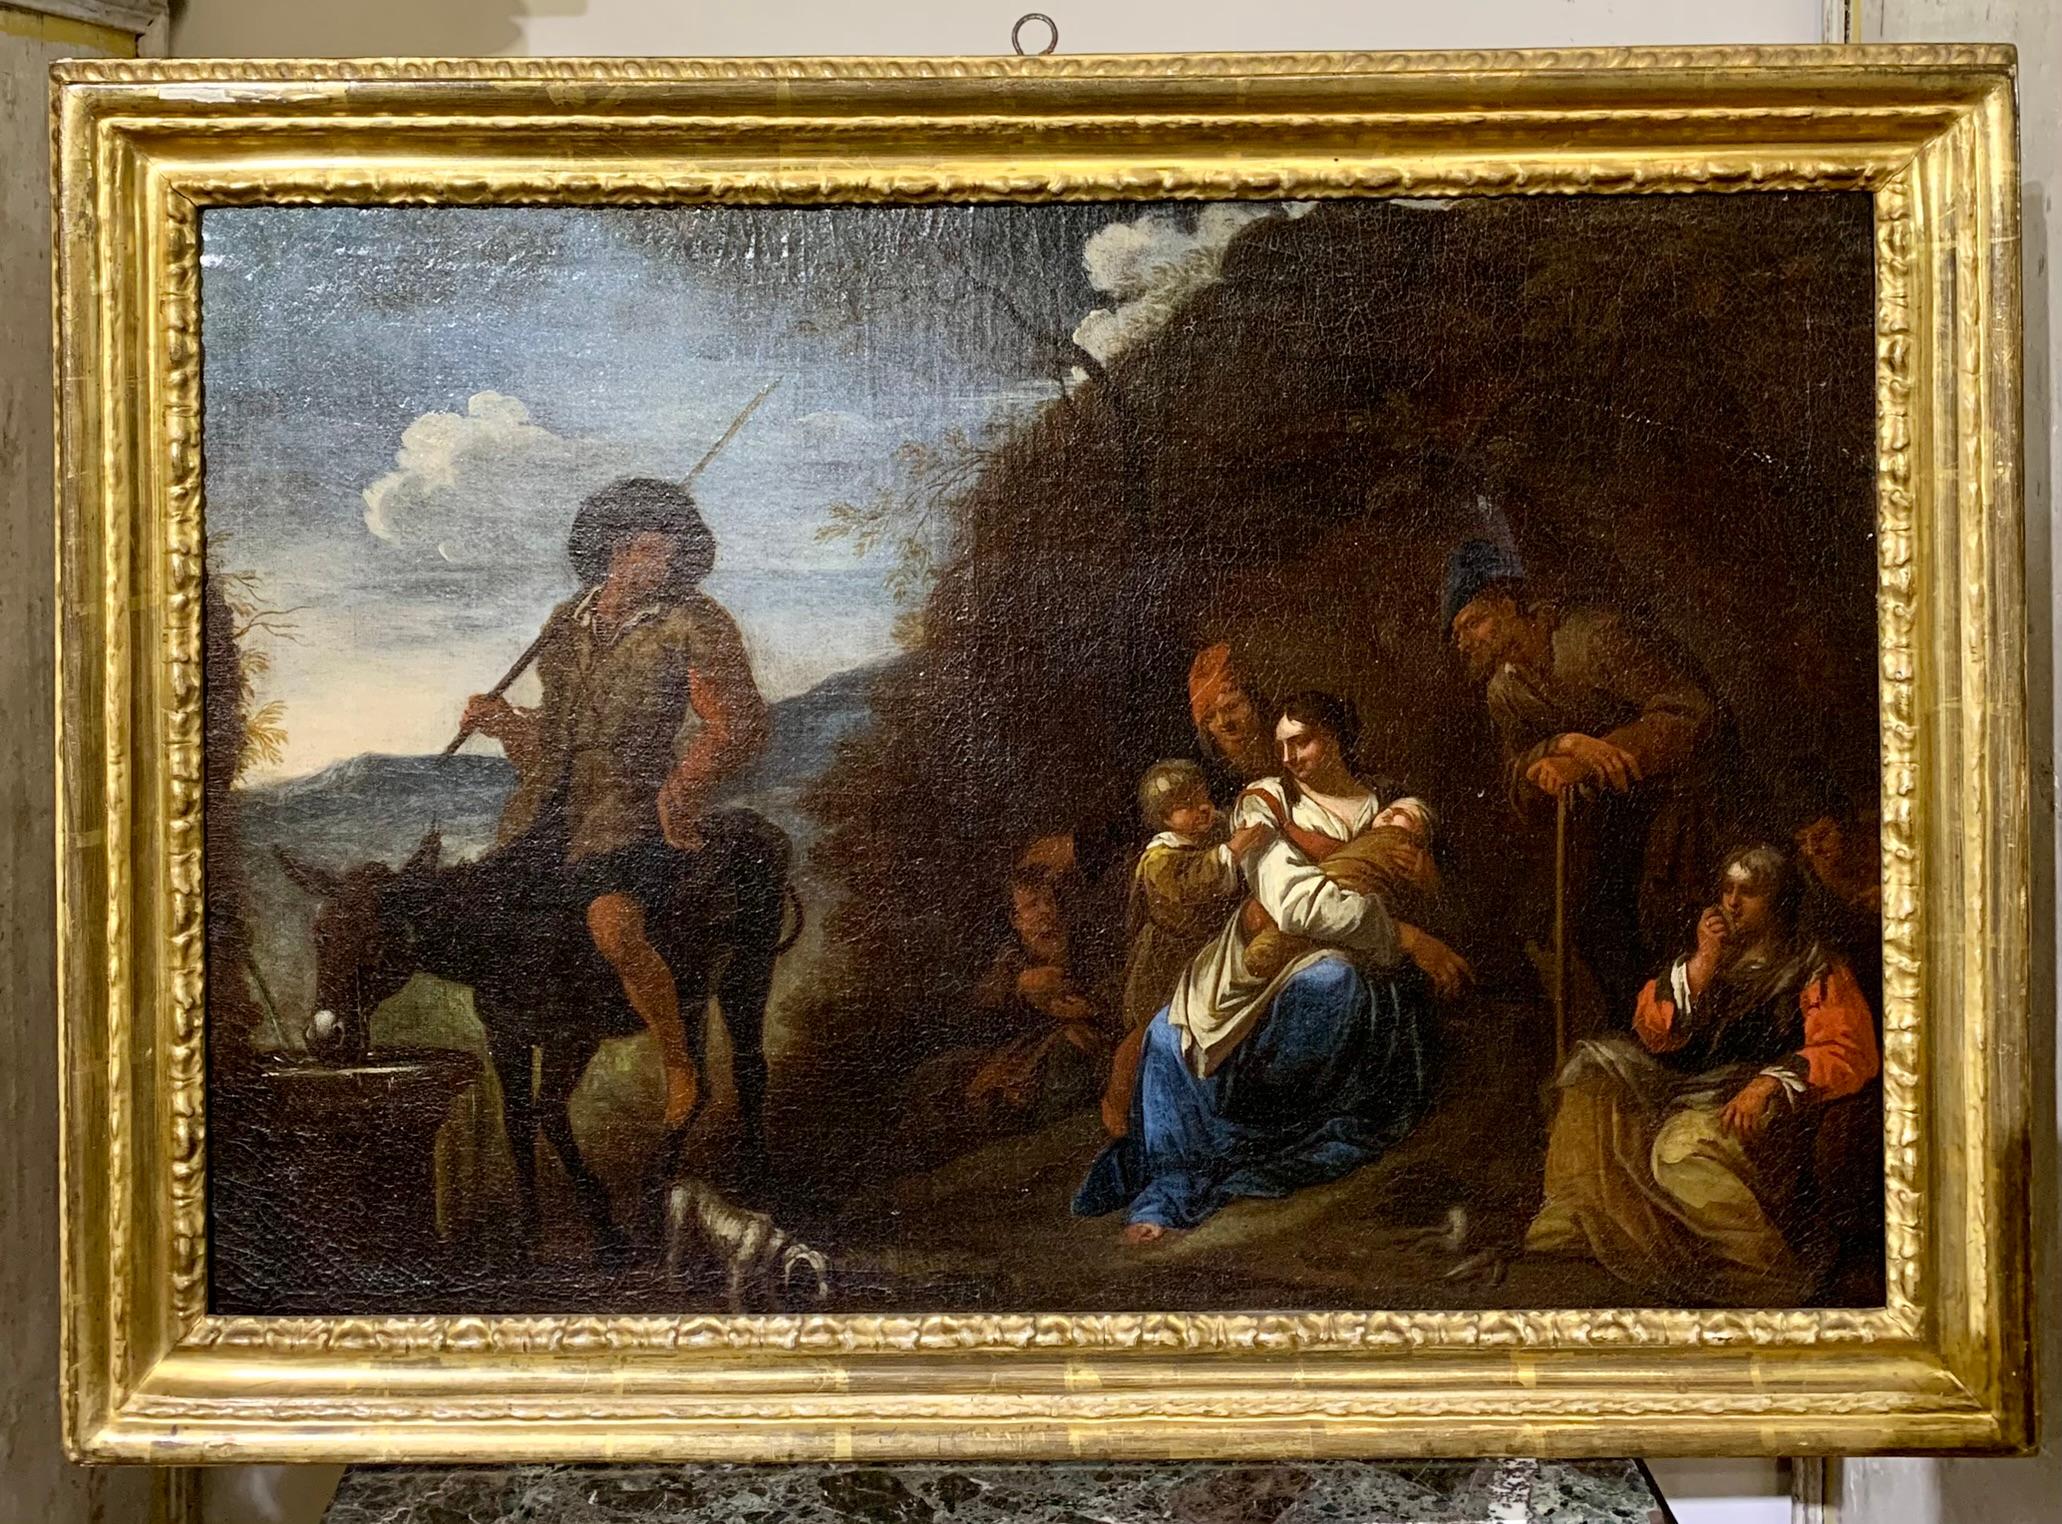 Rural scene with female figures, children and wayfarer attributed to the painter Jan Miel, known as Giovannino delle Vite (Beveren-Waas, 1599 - Turin, 1663). Oil on canvas in a carved and gilded wooden frame